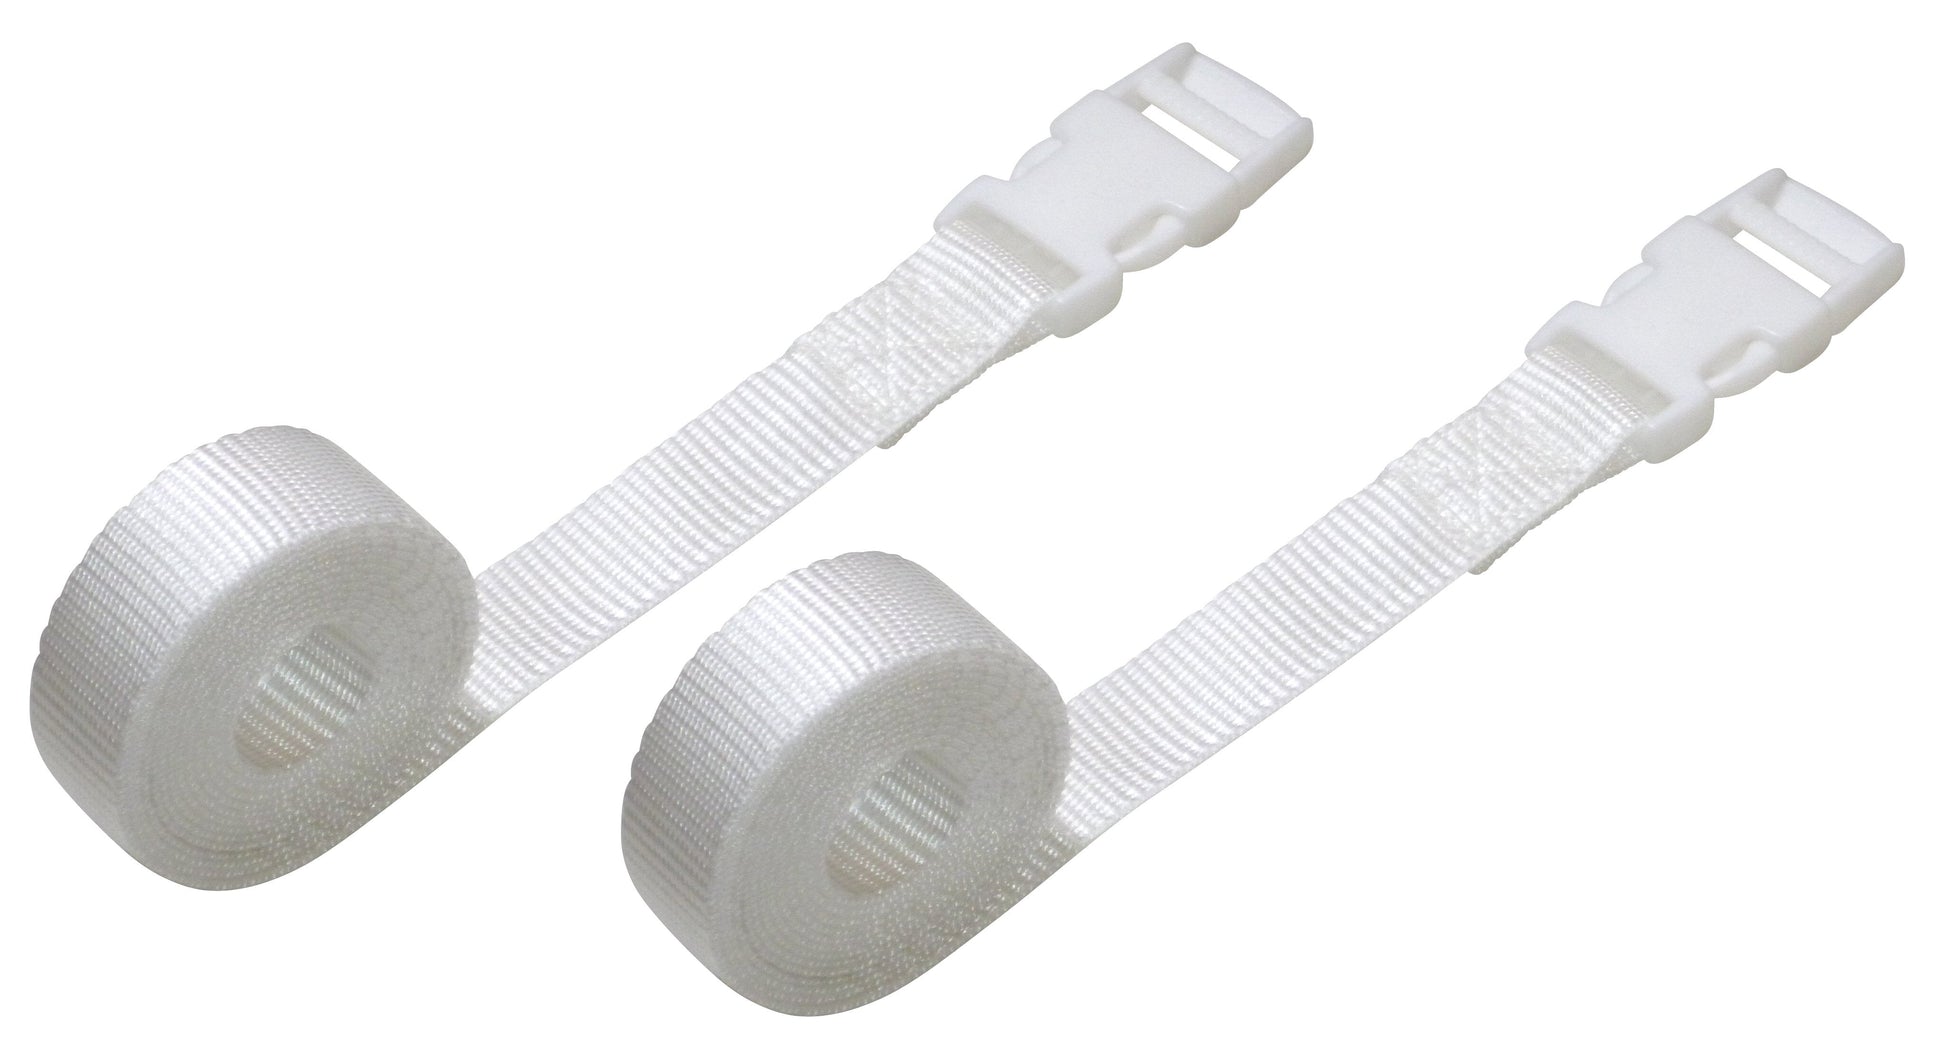 Benristraps 2 Pack Webbing Straps with Clips - Adjustable Luggage Straps in white